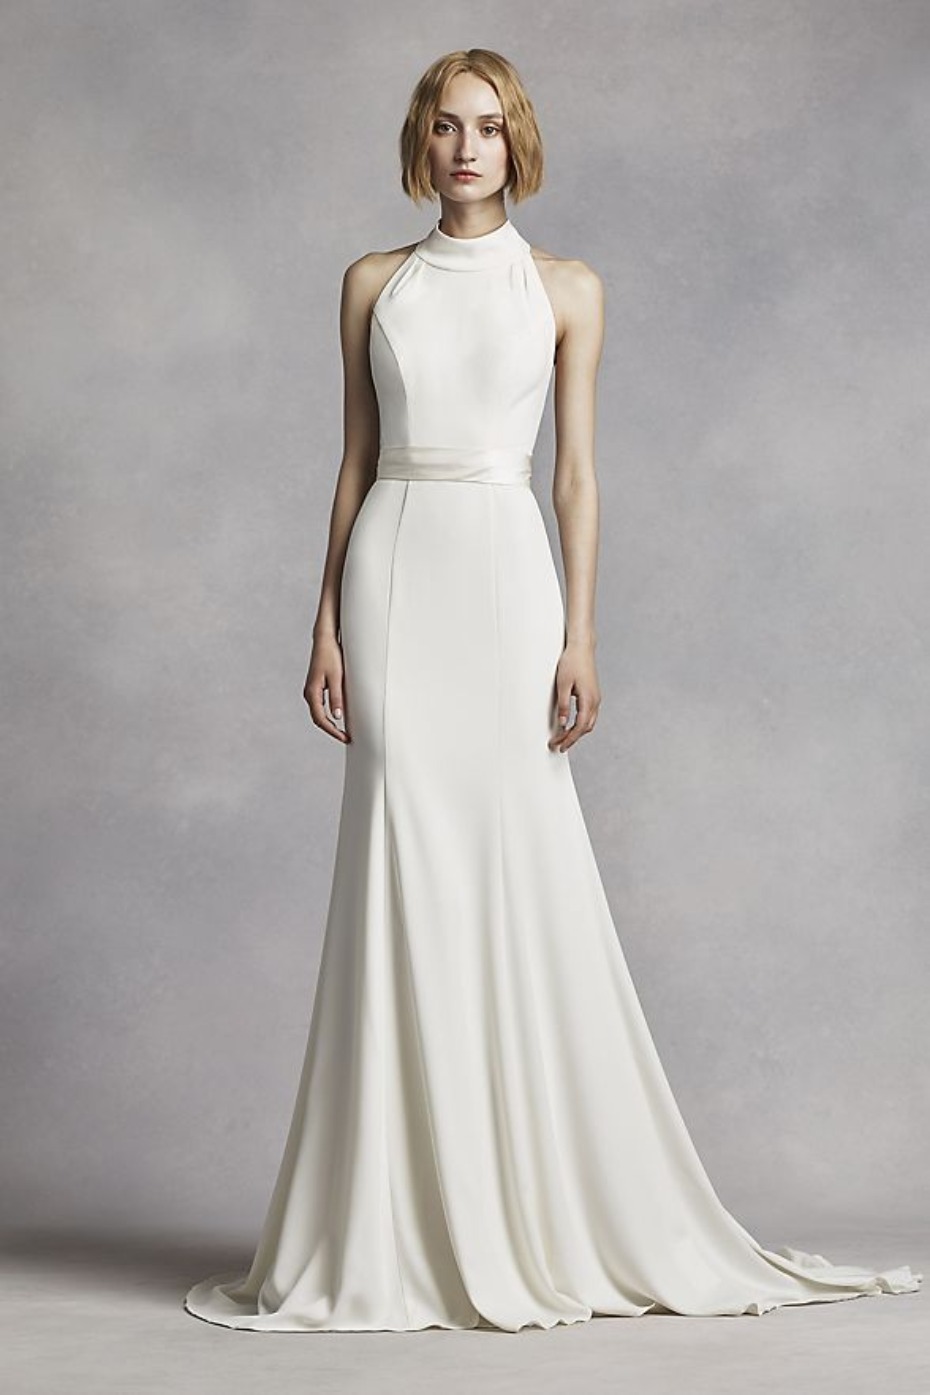 David's Bridal White by Vera Wang High Neck Halter Gown